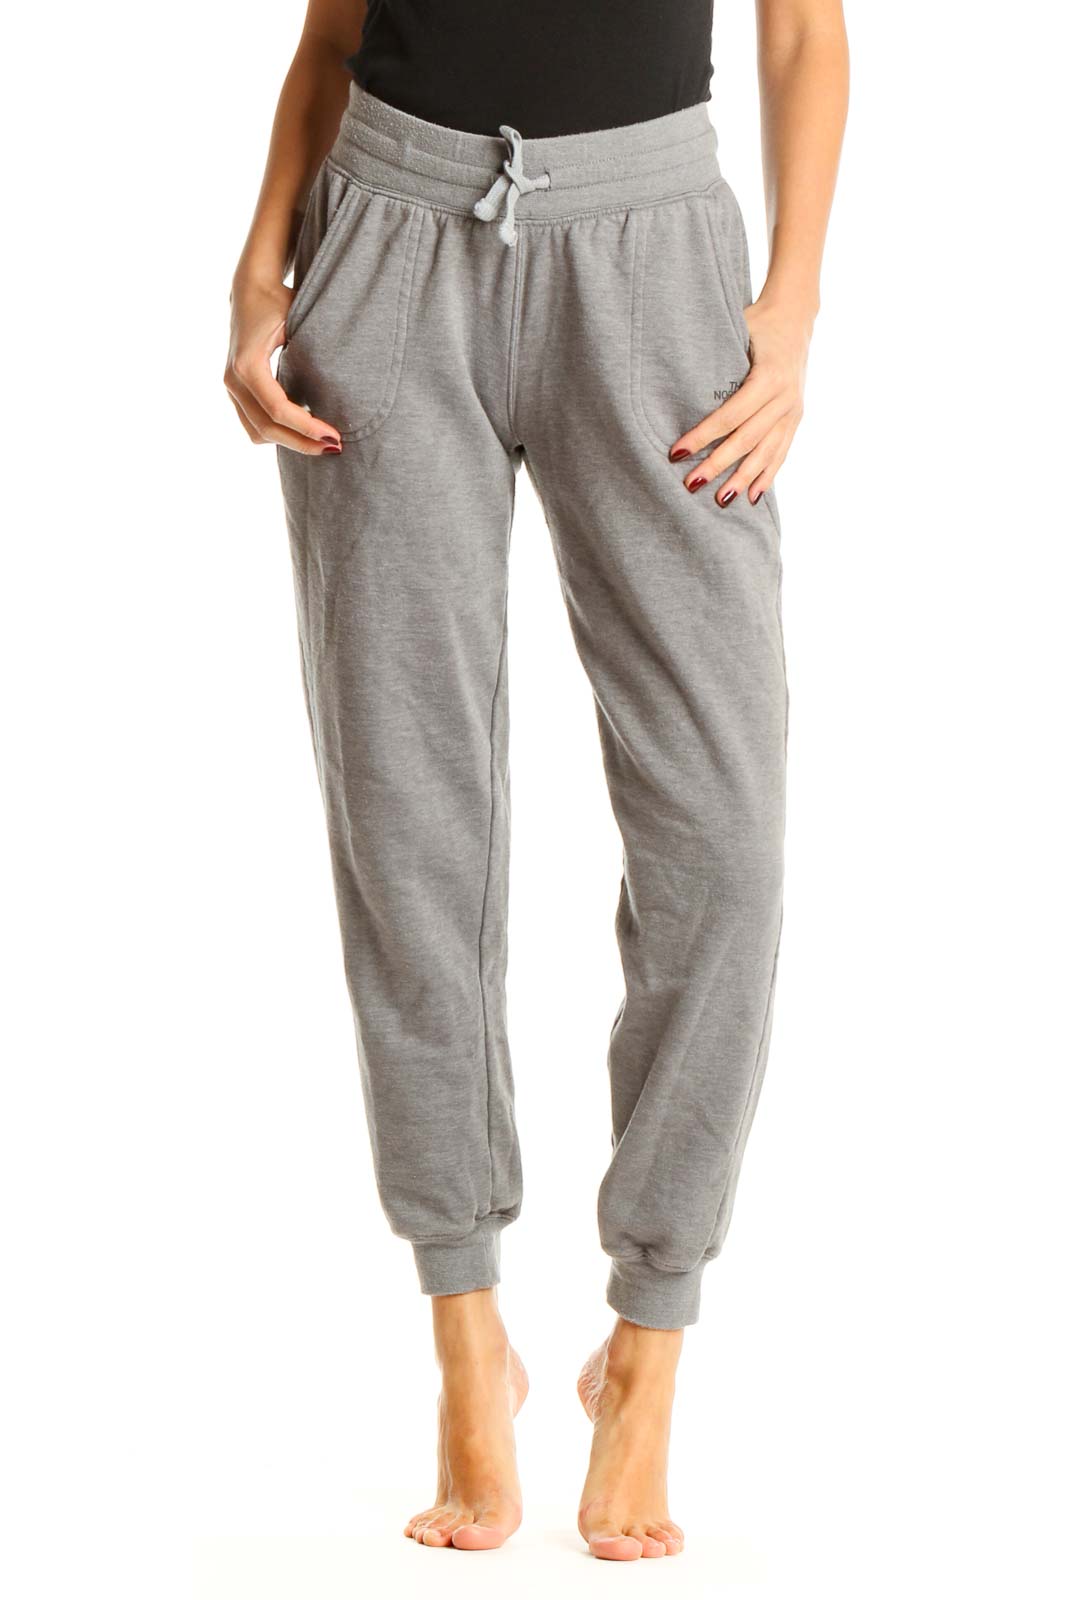 Gray Casual Sweatpants Front